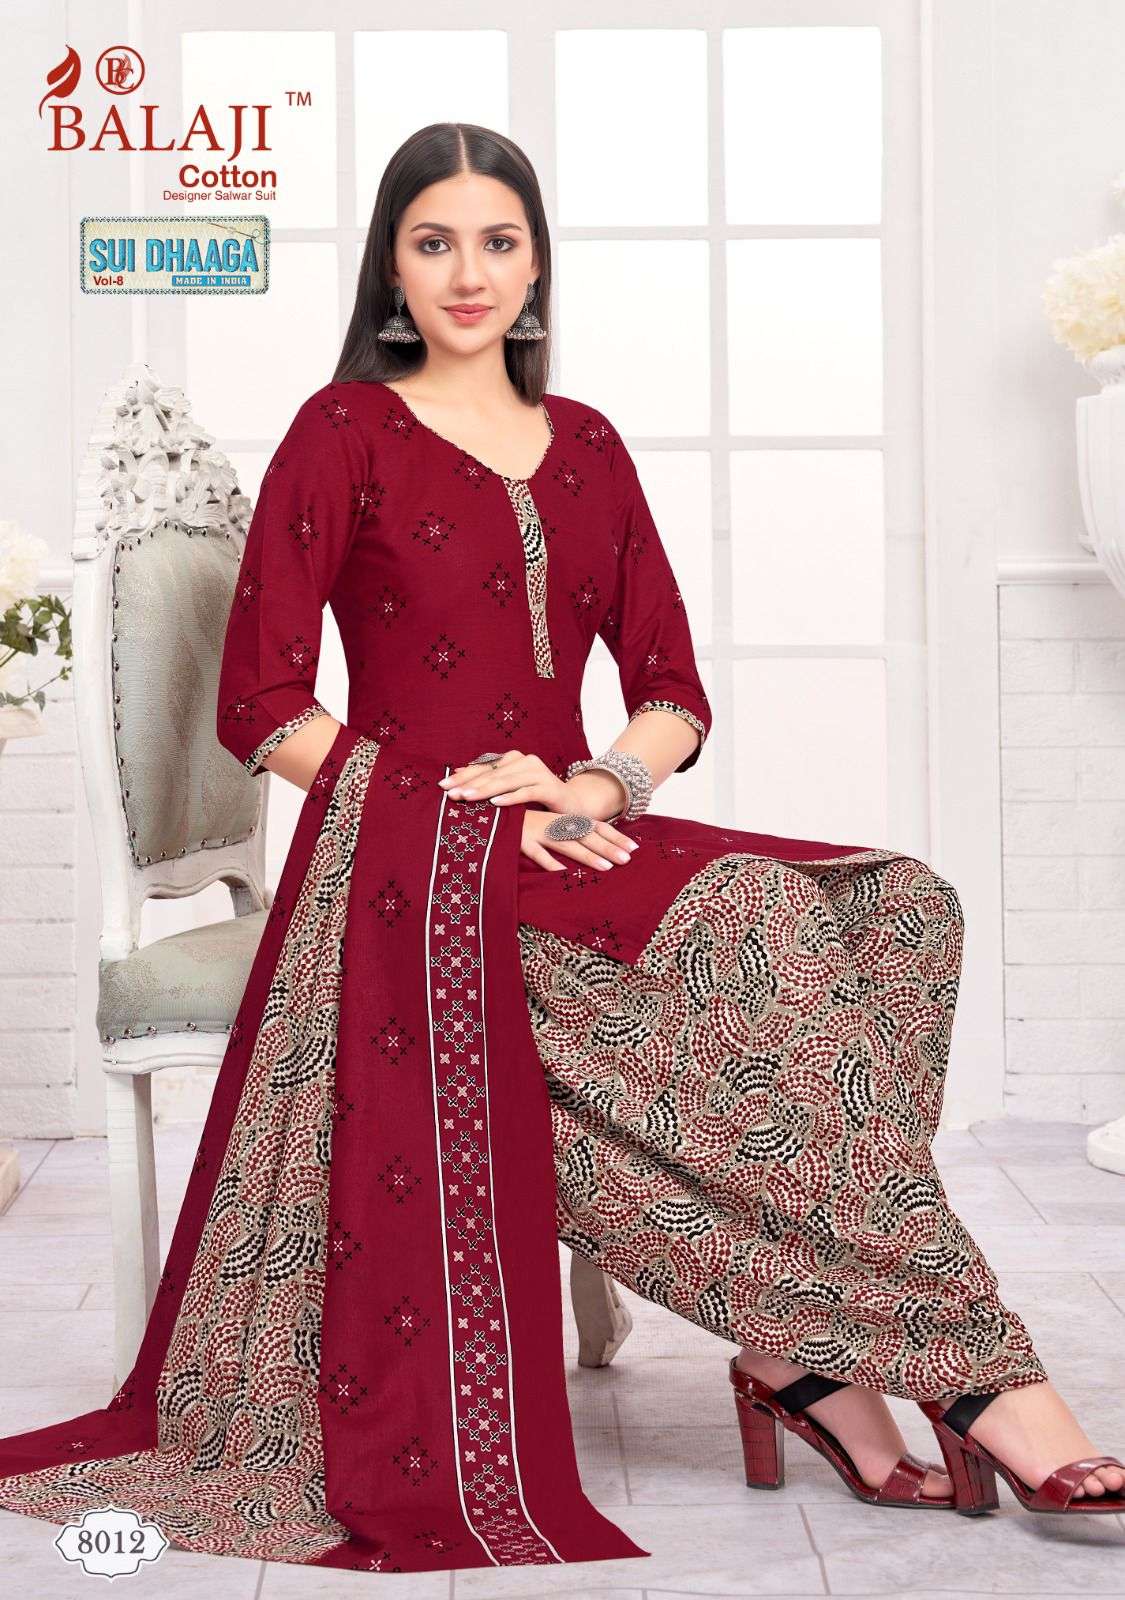 Sui Dhaaga Vol-8 By Balaji Cotton 8001 To 8012 Series Beautiful Suits Colorful Stylish Fancy Casual Wear & Ethnic Wear Soft Cotton Print Dresses At Wholesale Price